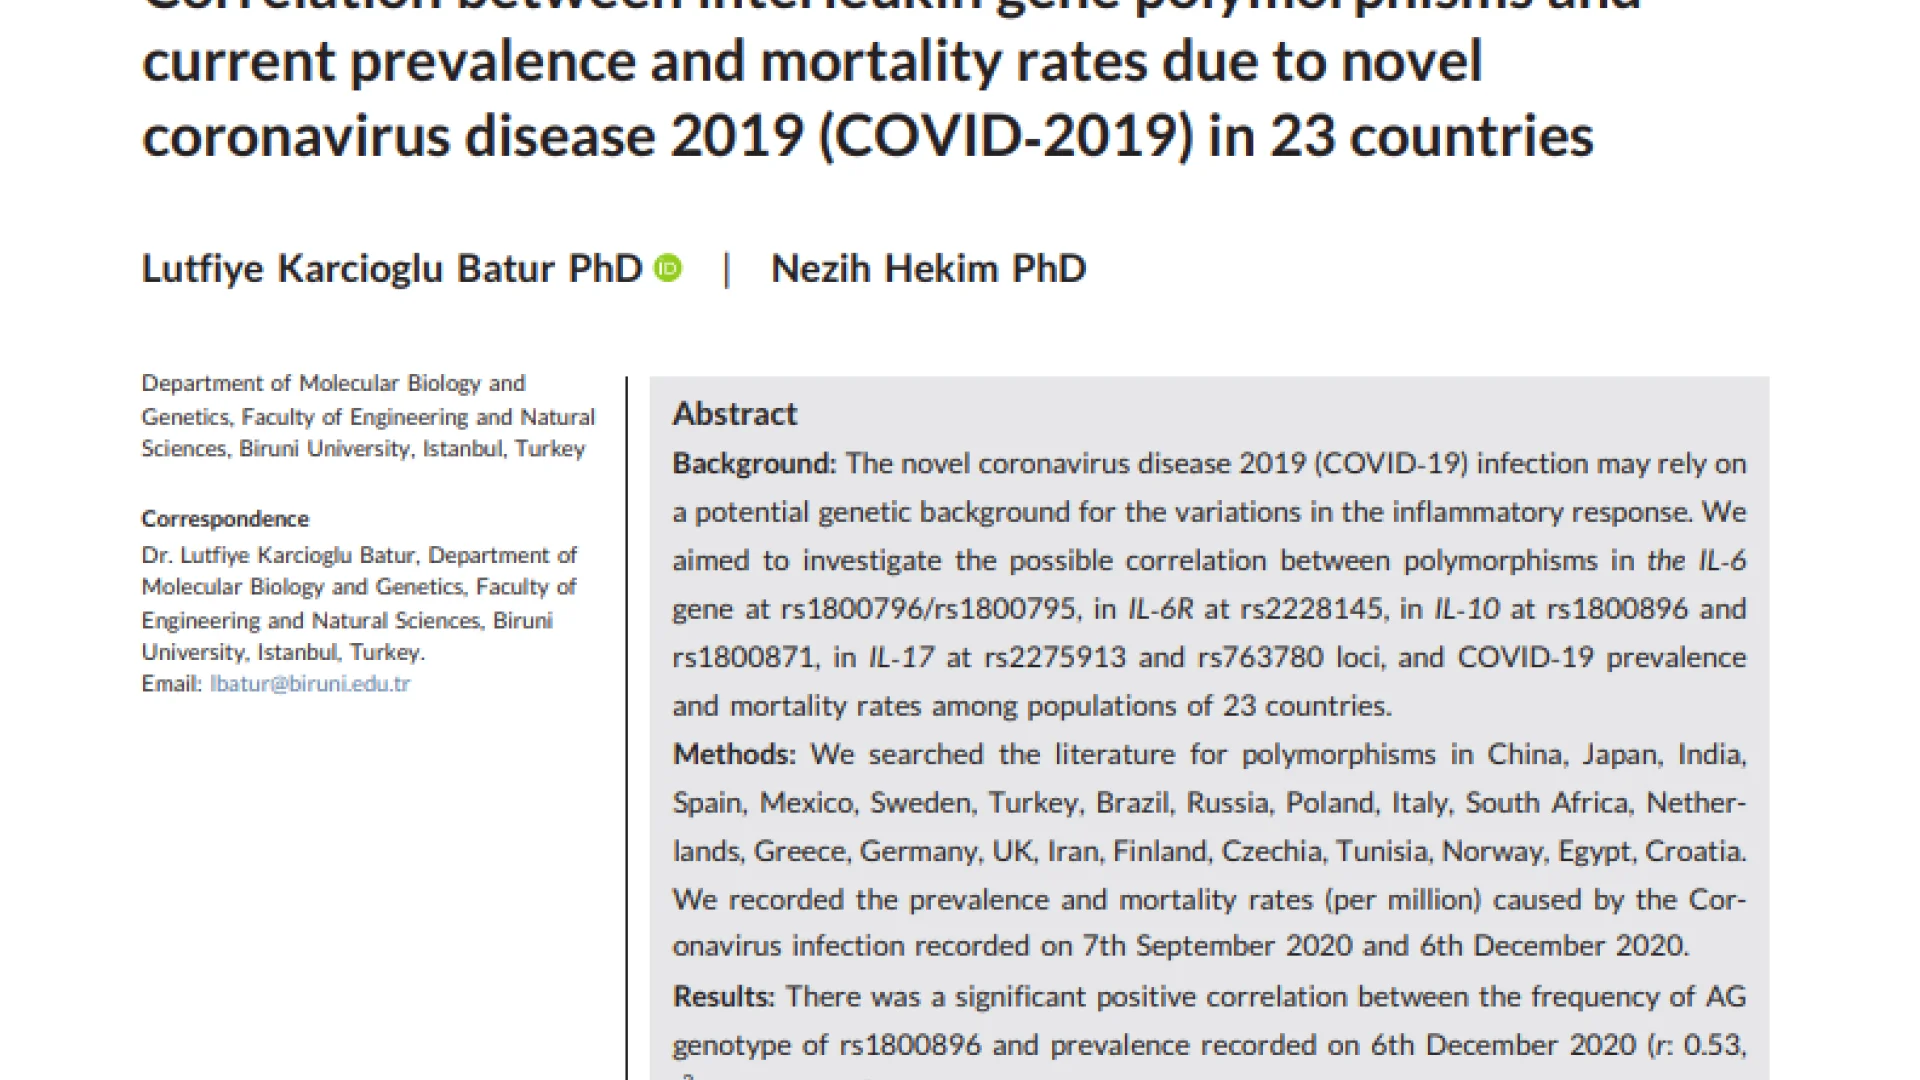 Correlation between interleukin gene polymorphisms and current prevalence and mortality rates due to novel coronavirus disease 2019 (COVID‐2019) in 23 countries